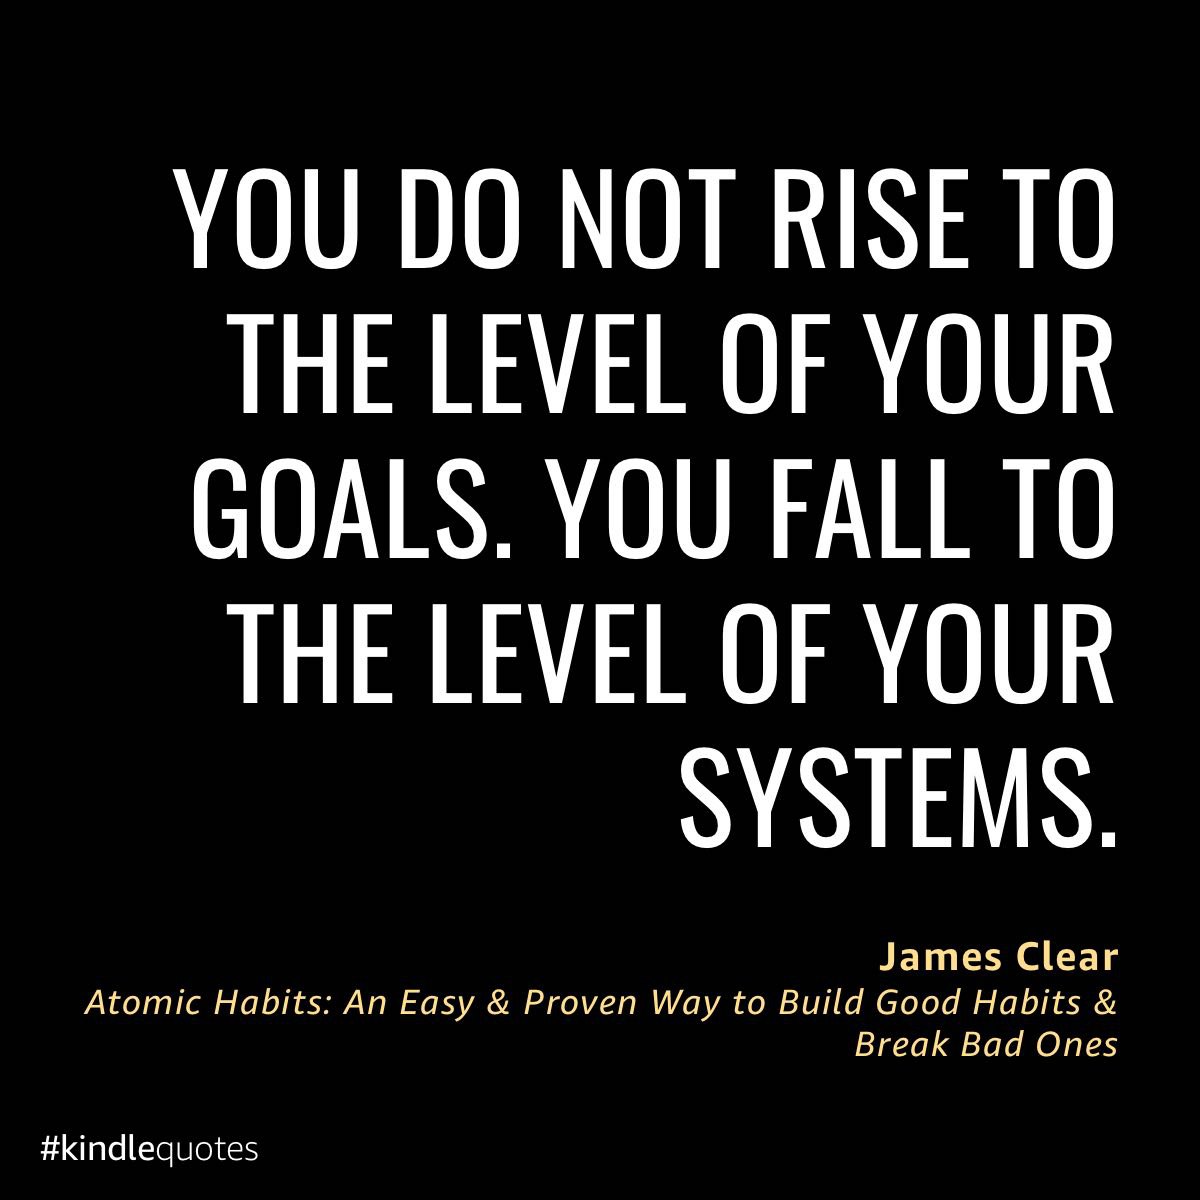 You do not rise to the level of your goals. You fall to the level of your systems.